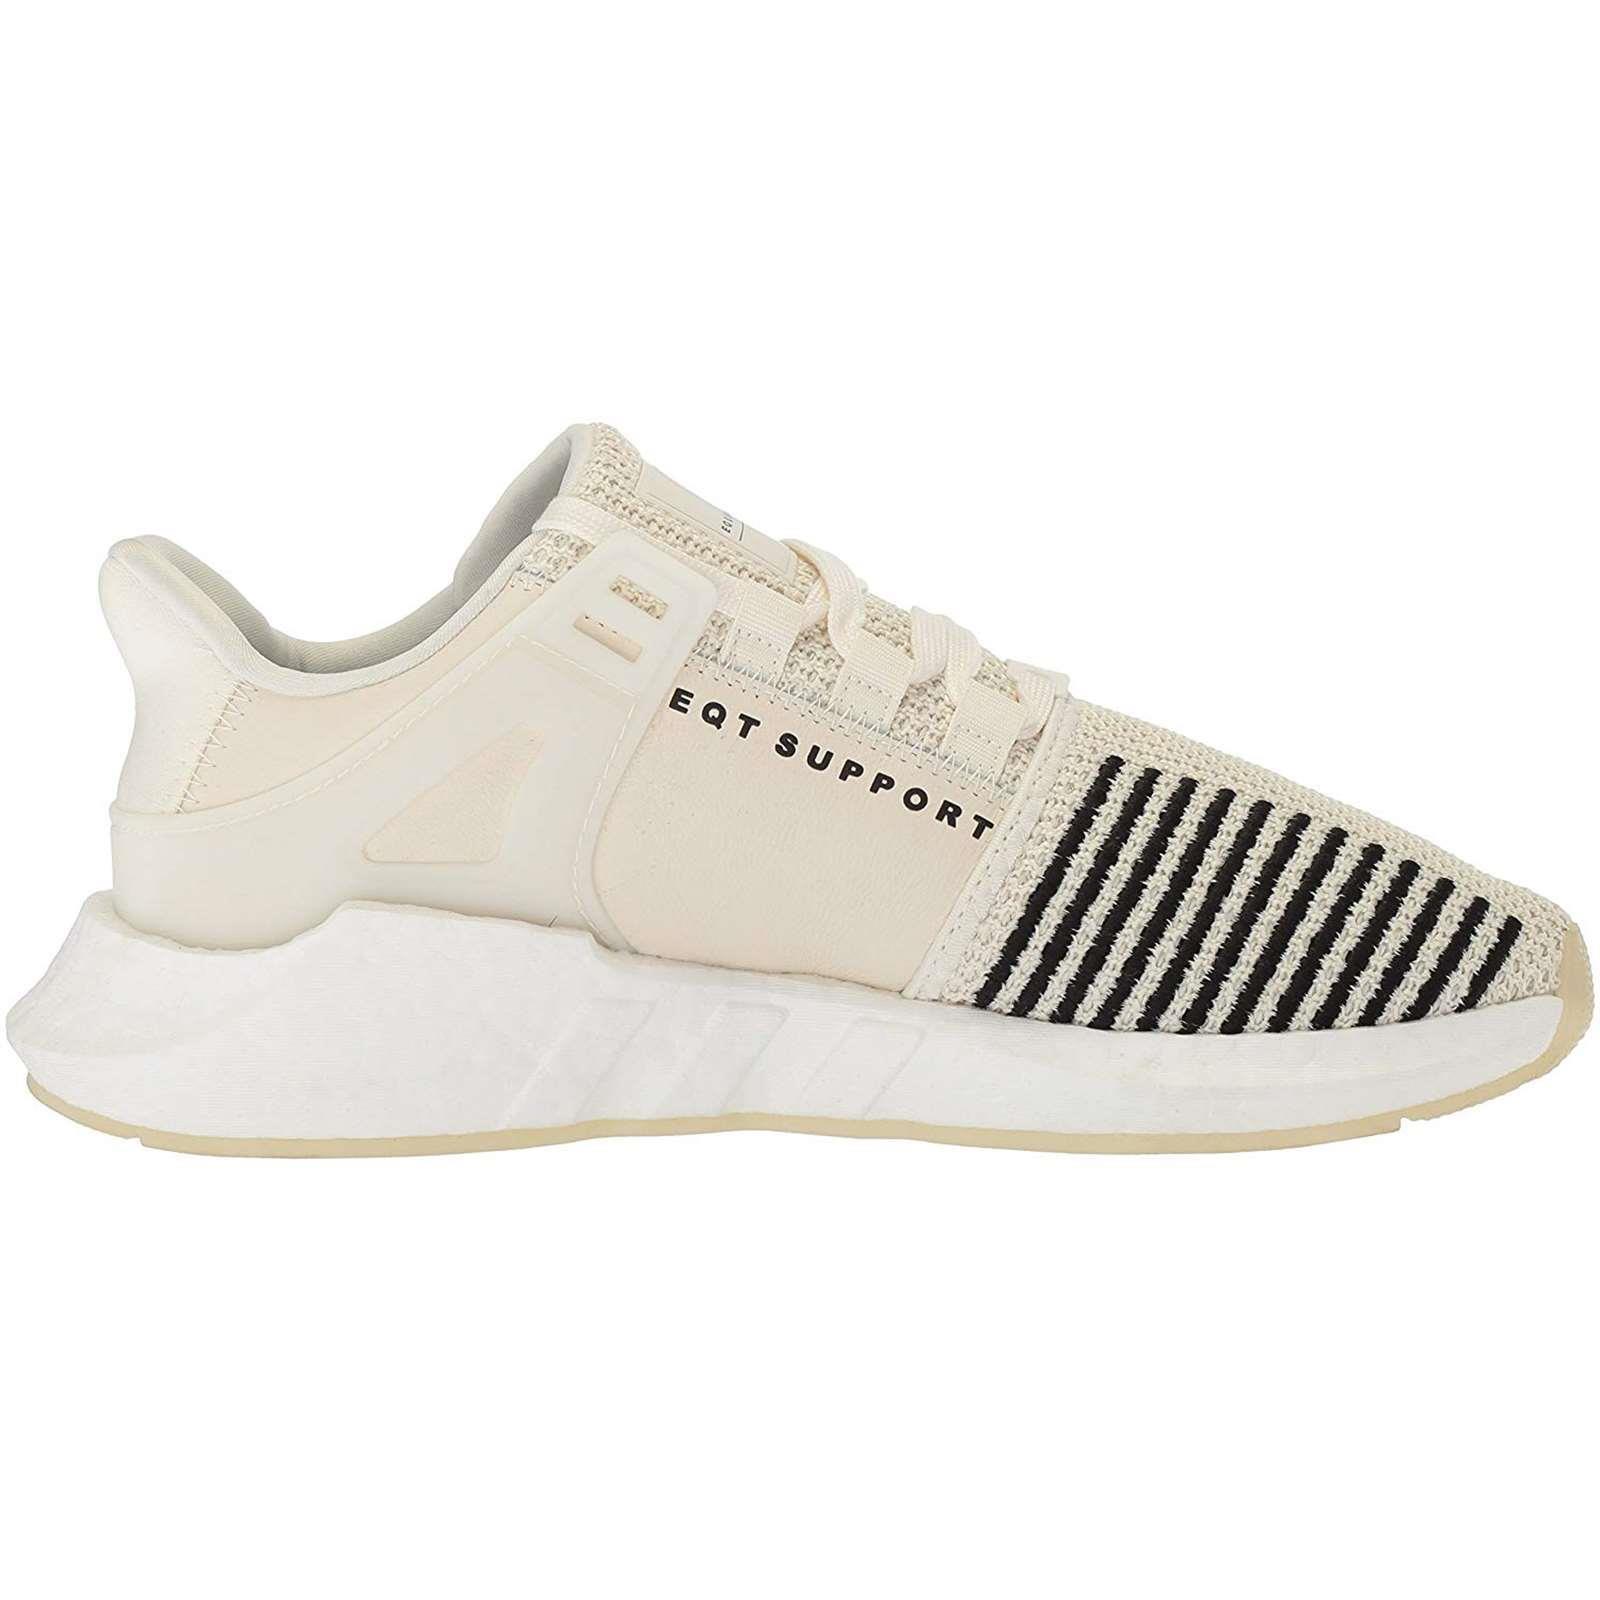 Adidas shoes EQT Support - White 0